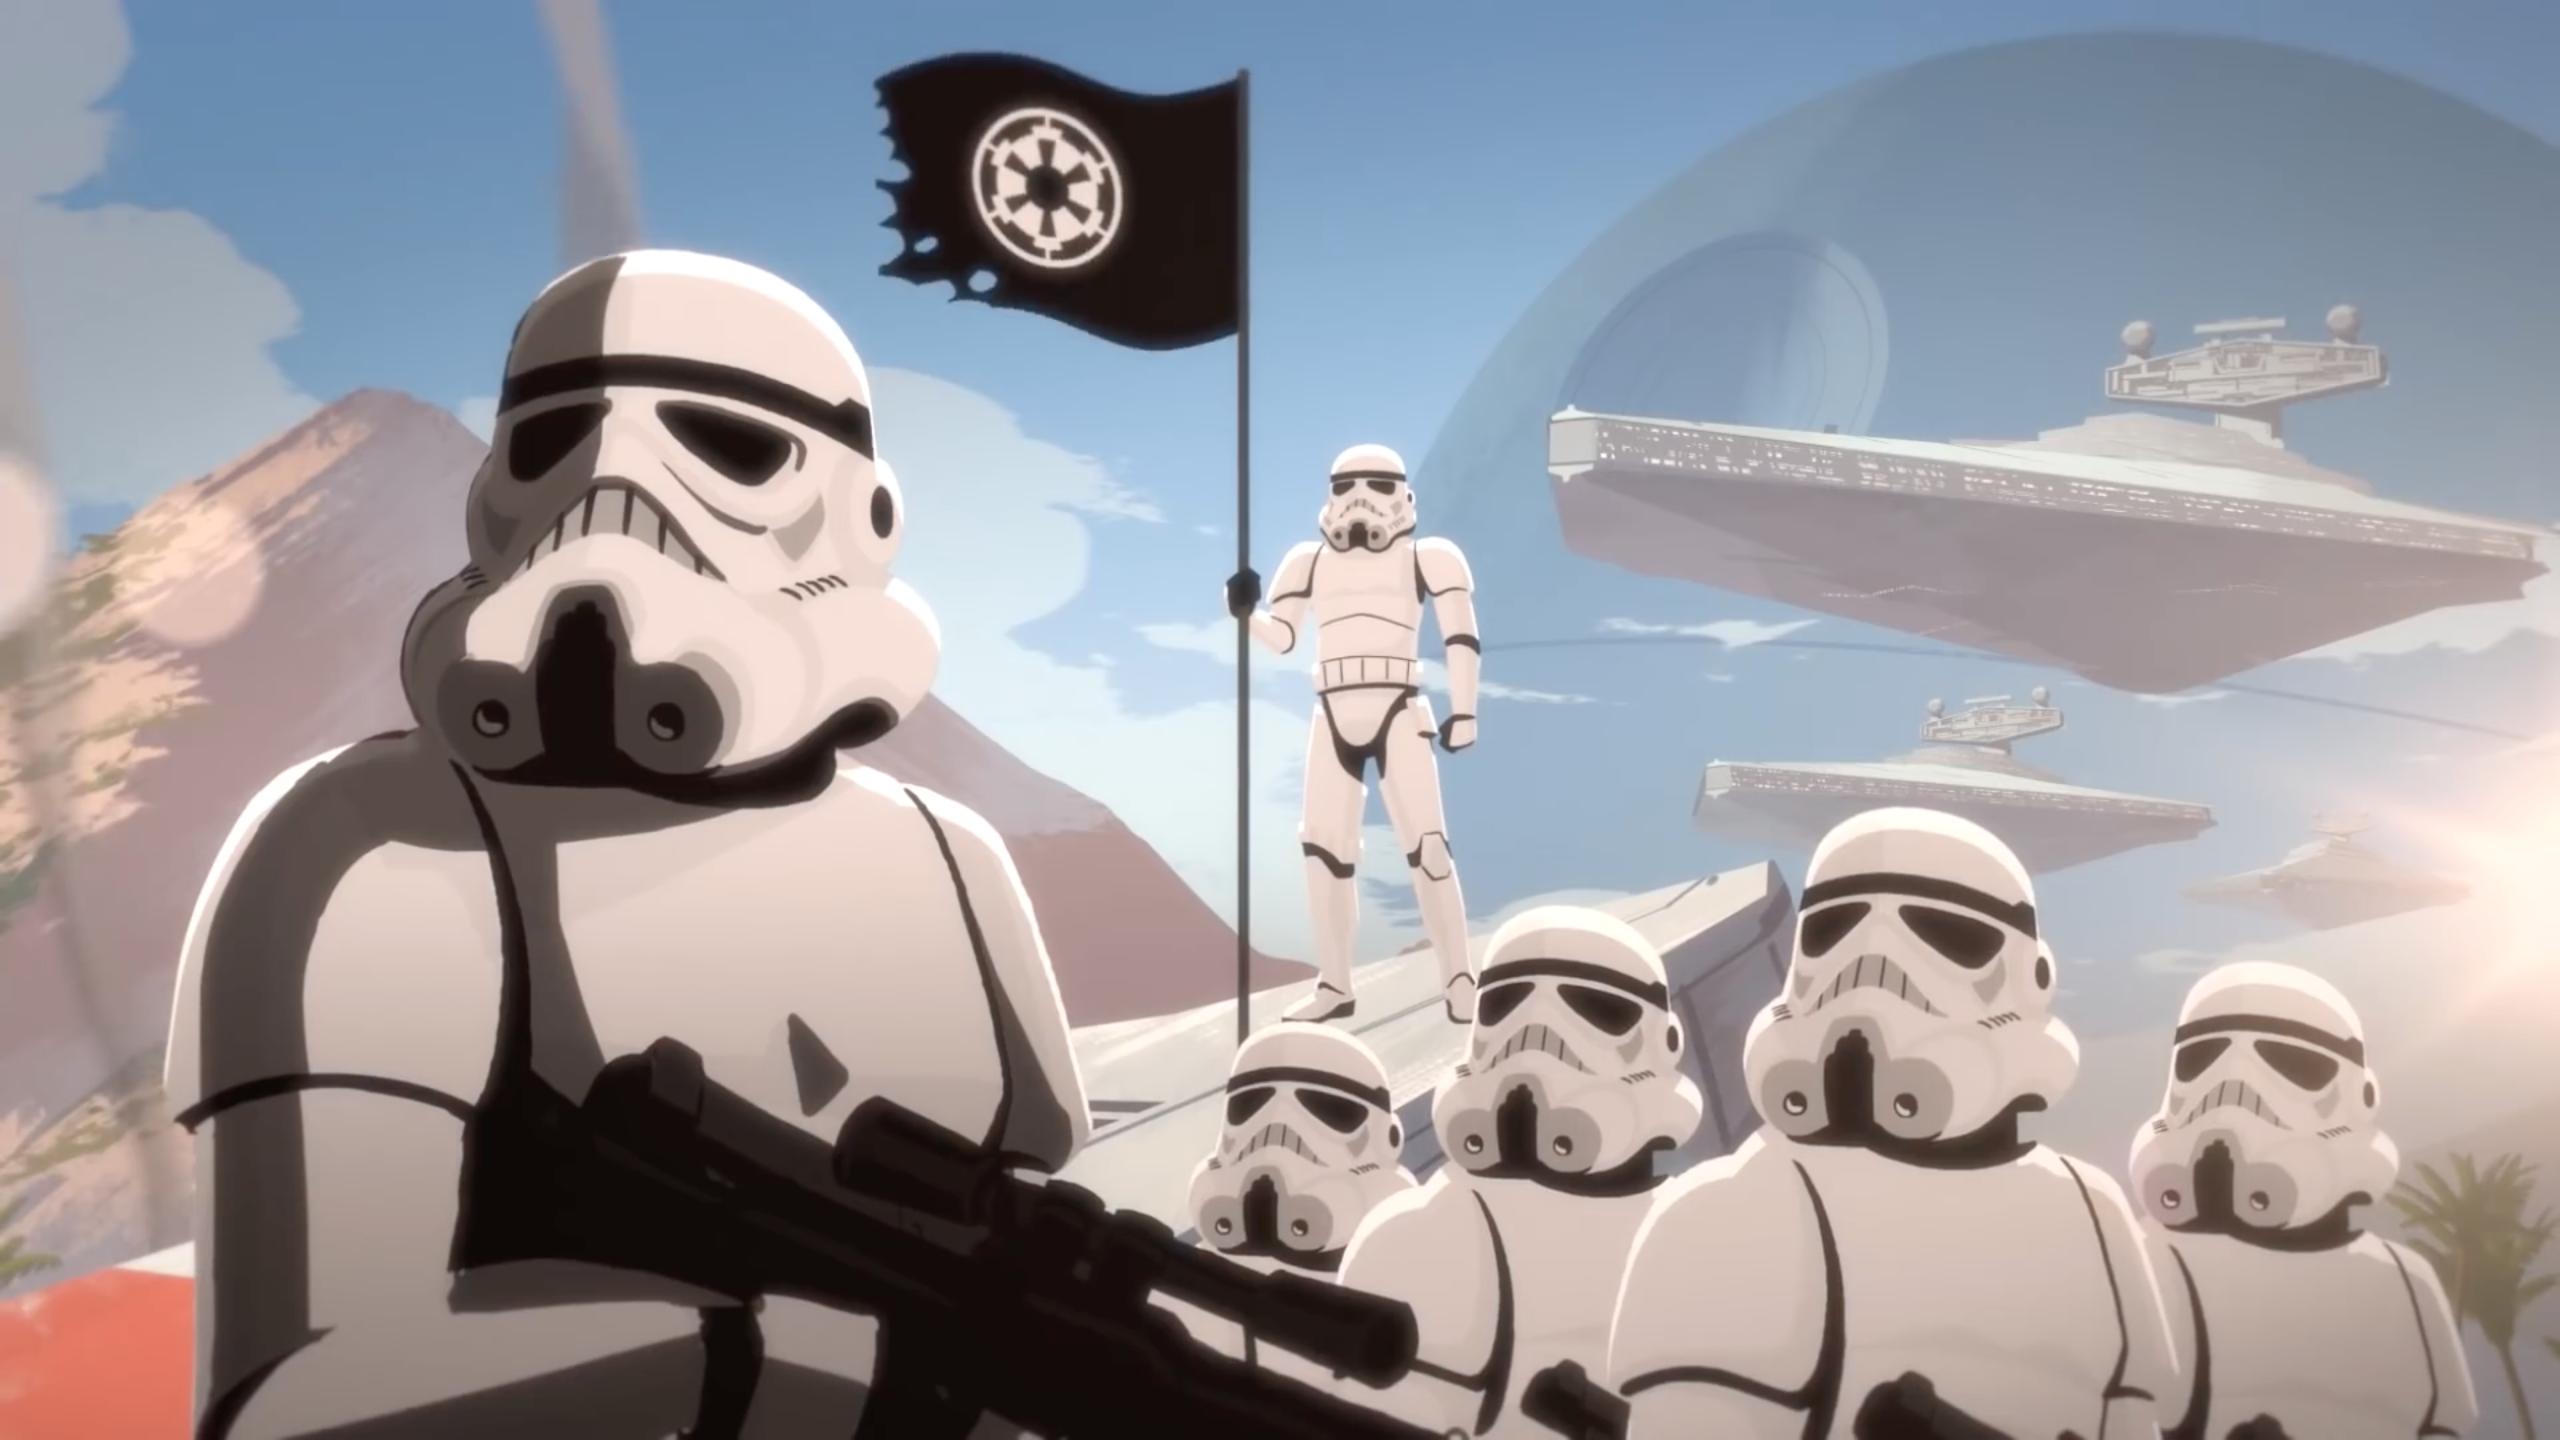 Star Wars Galaxy of Adventures Stormtroopers vs. Rebels of the Galactic Empire (TV Episode 2019)